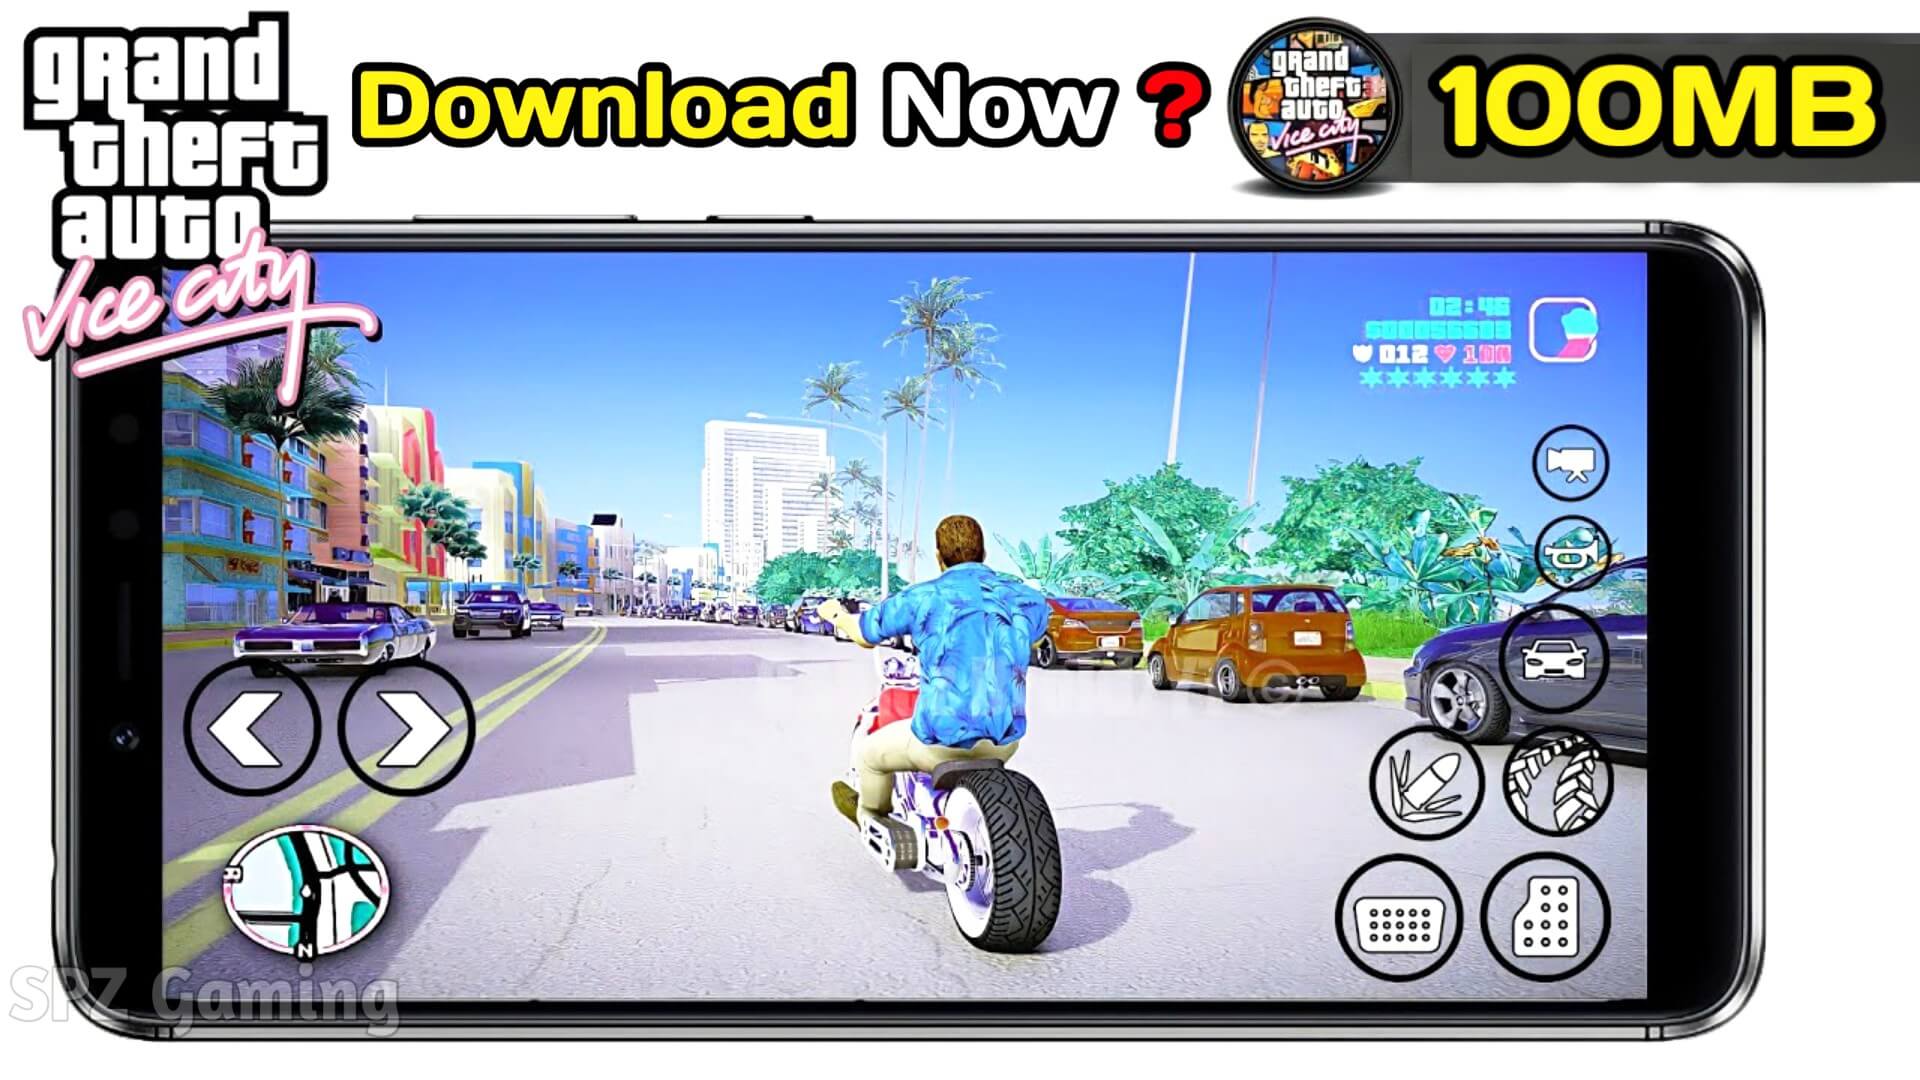 Download Gta Vice City On Android Install Gta Vice City On Android All Gpu 2021